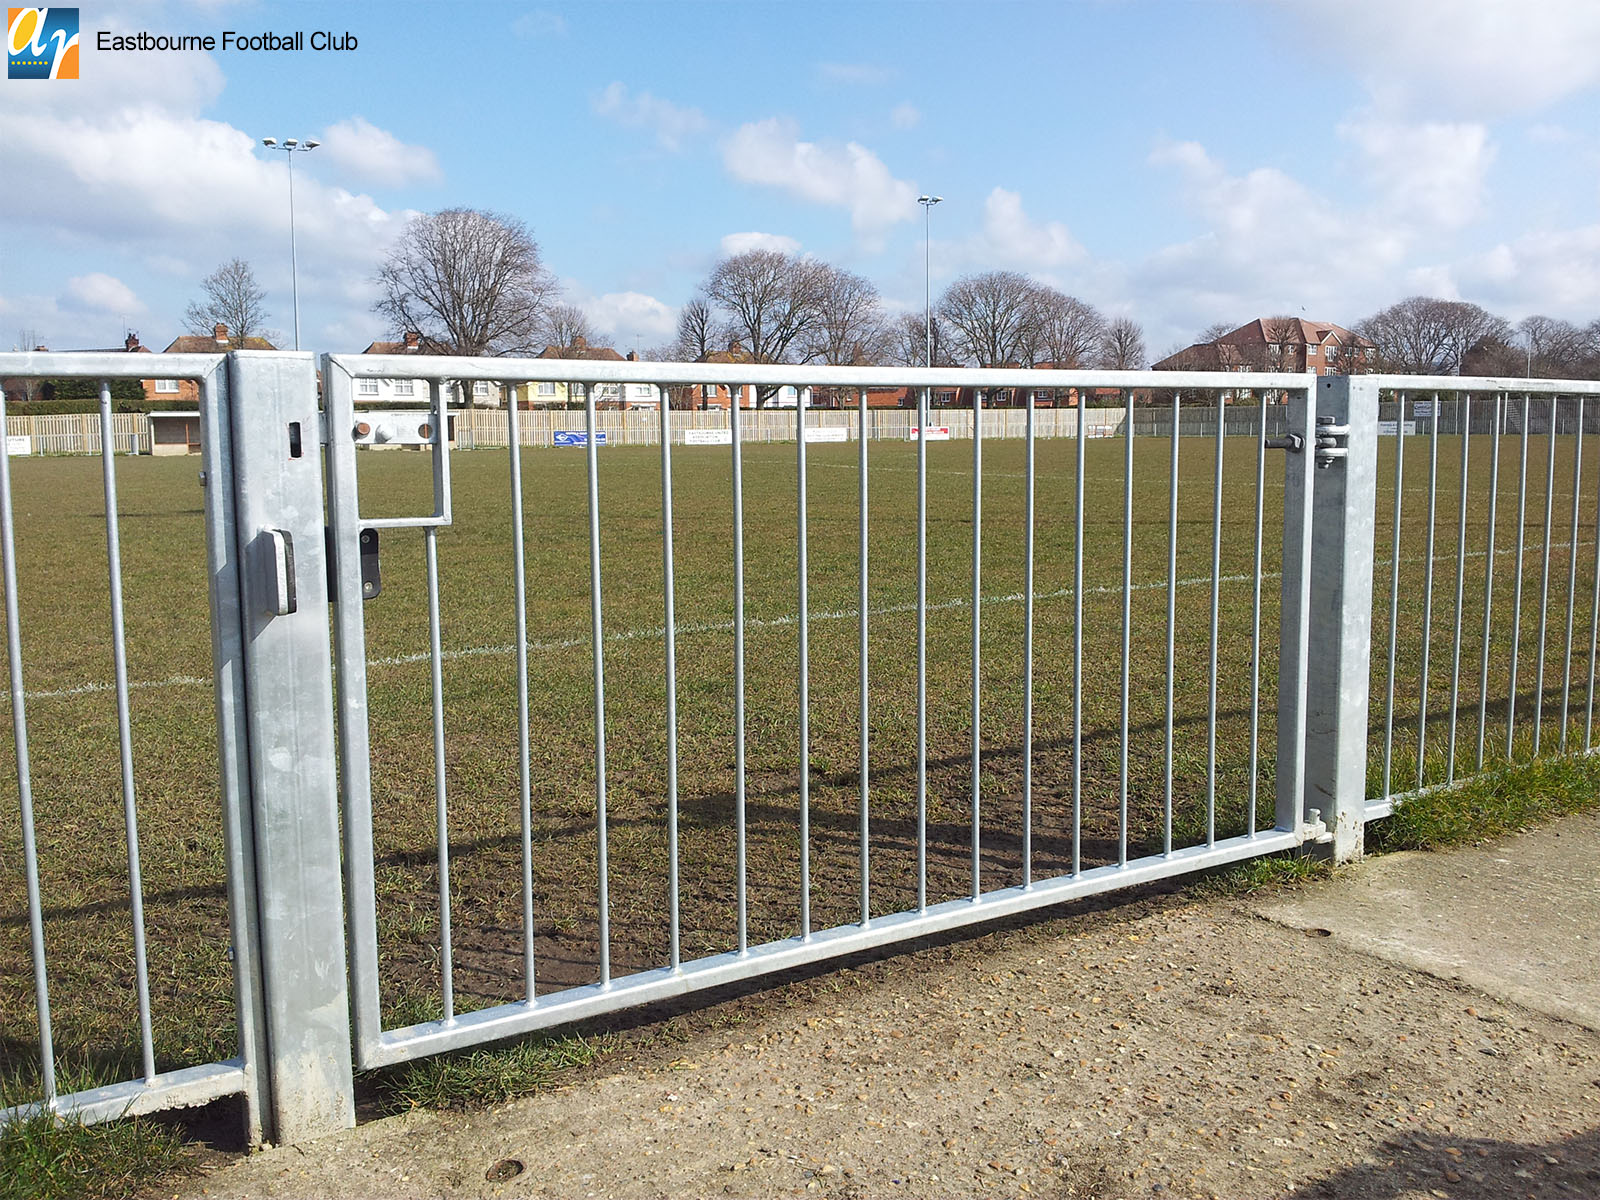 Metal sports pitch barrier